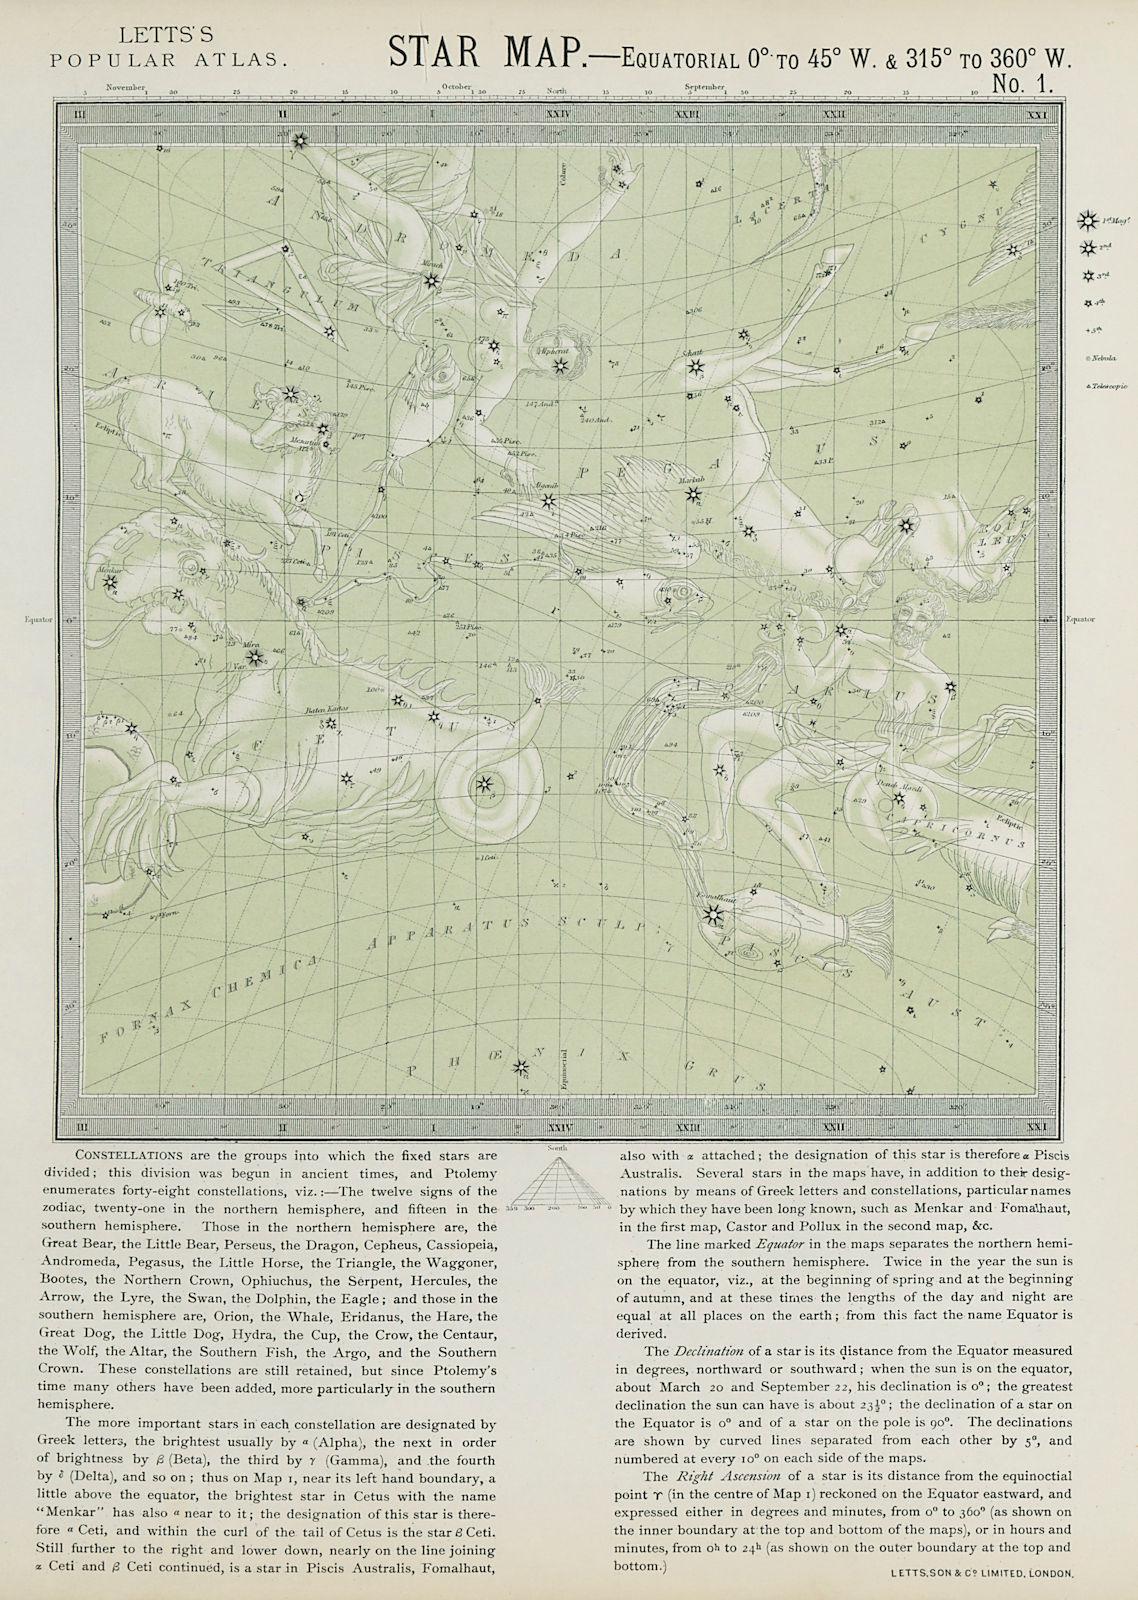 Associate Product ASTRONOMY CELESTIAL Star map chart signs Spring Aries Aquarius Pisces LETTS 1884